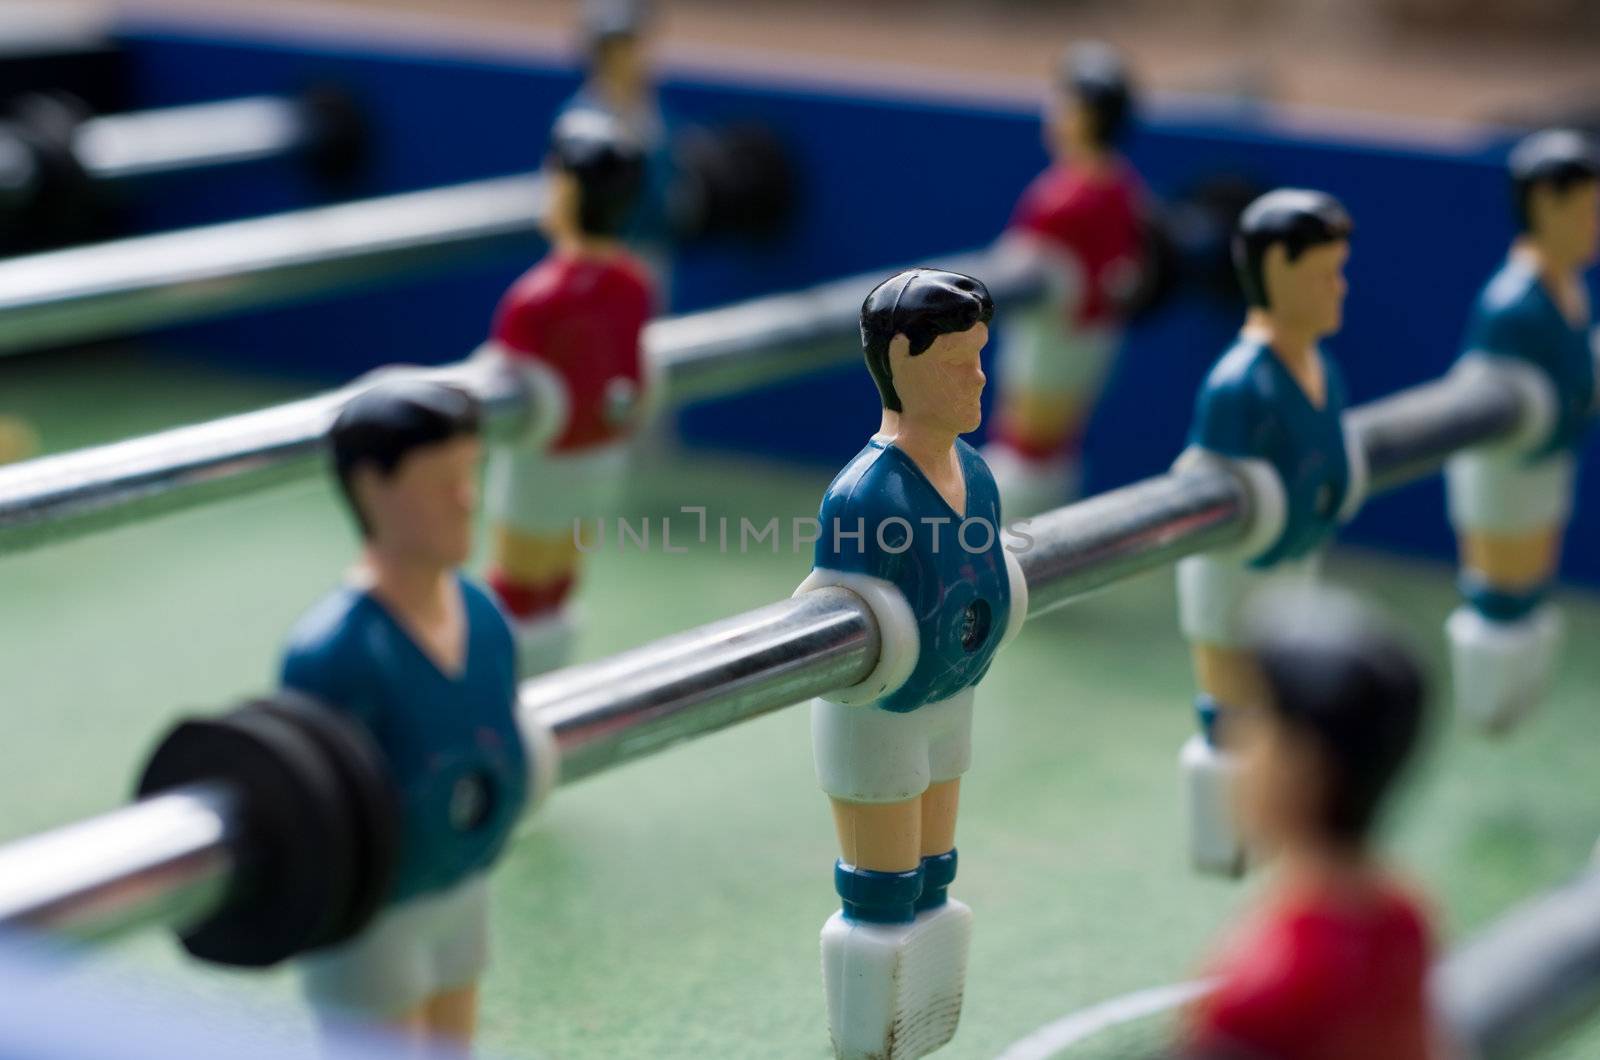 Blue table soccer players